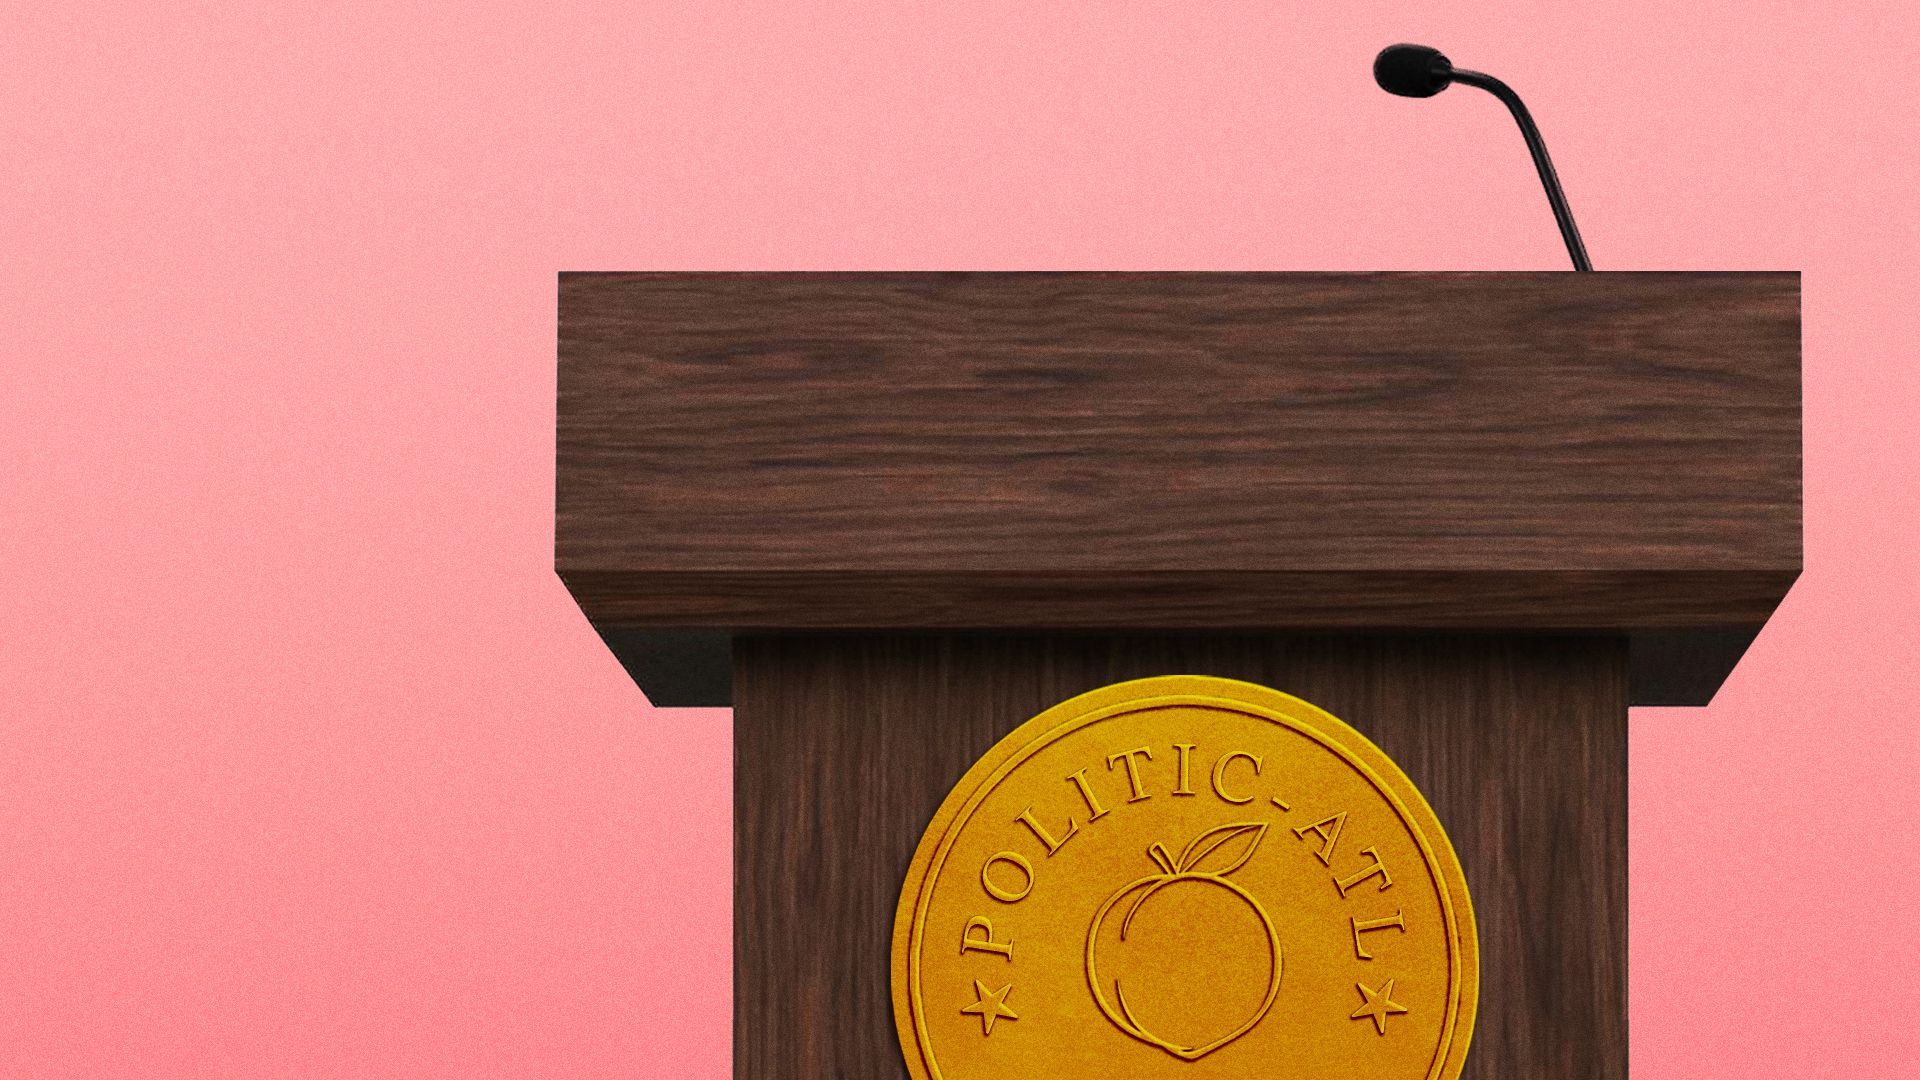 Illustration of a podium with a gold seal; the seal has a peach and says "POLITIC-ATL."